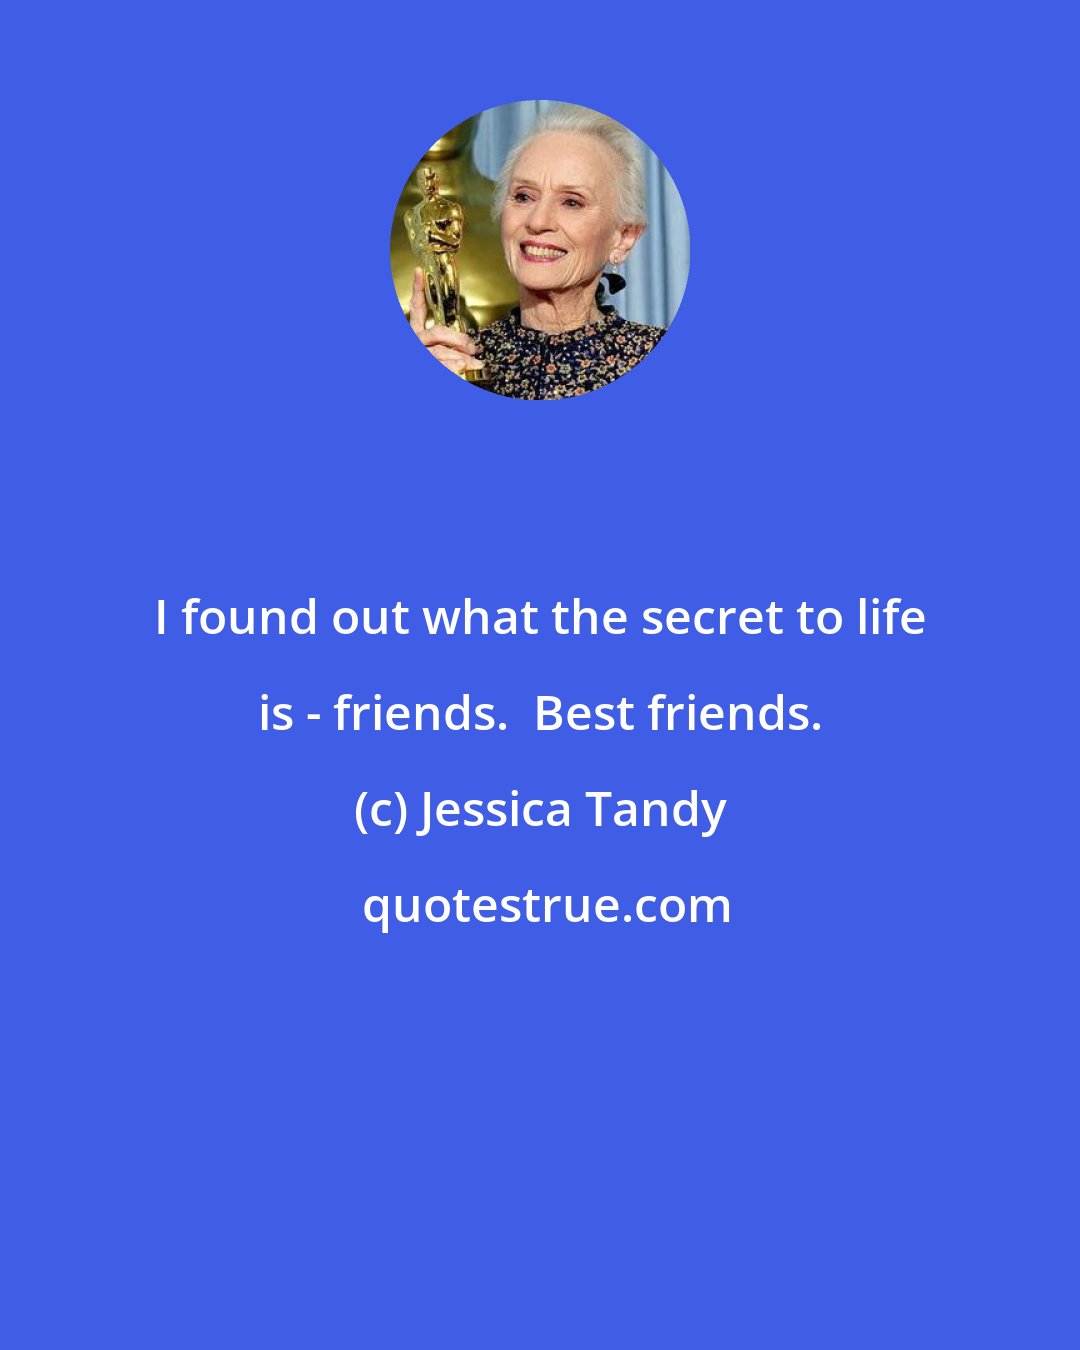 Jessica Tandy: I found out what the secret to life is - friends.  Best friends.